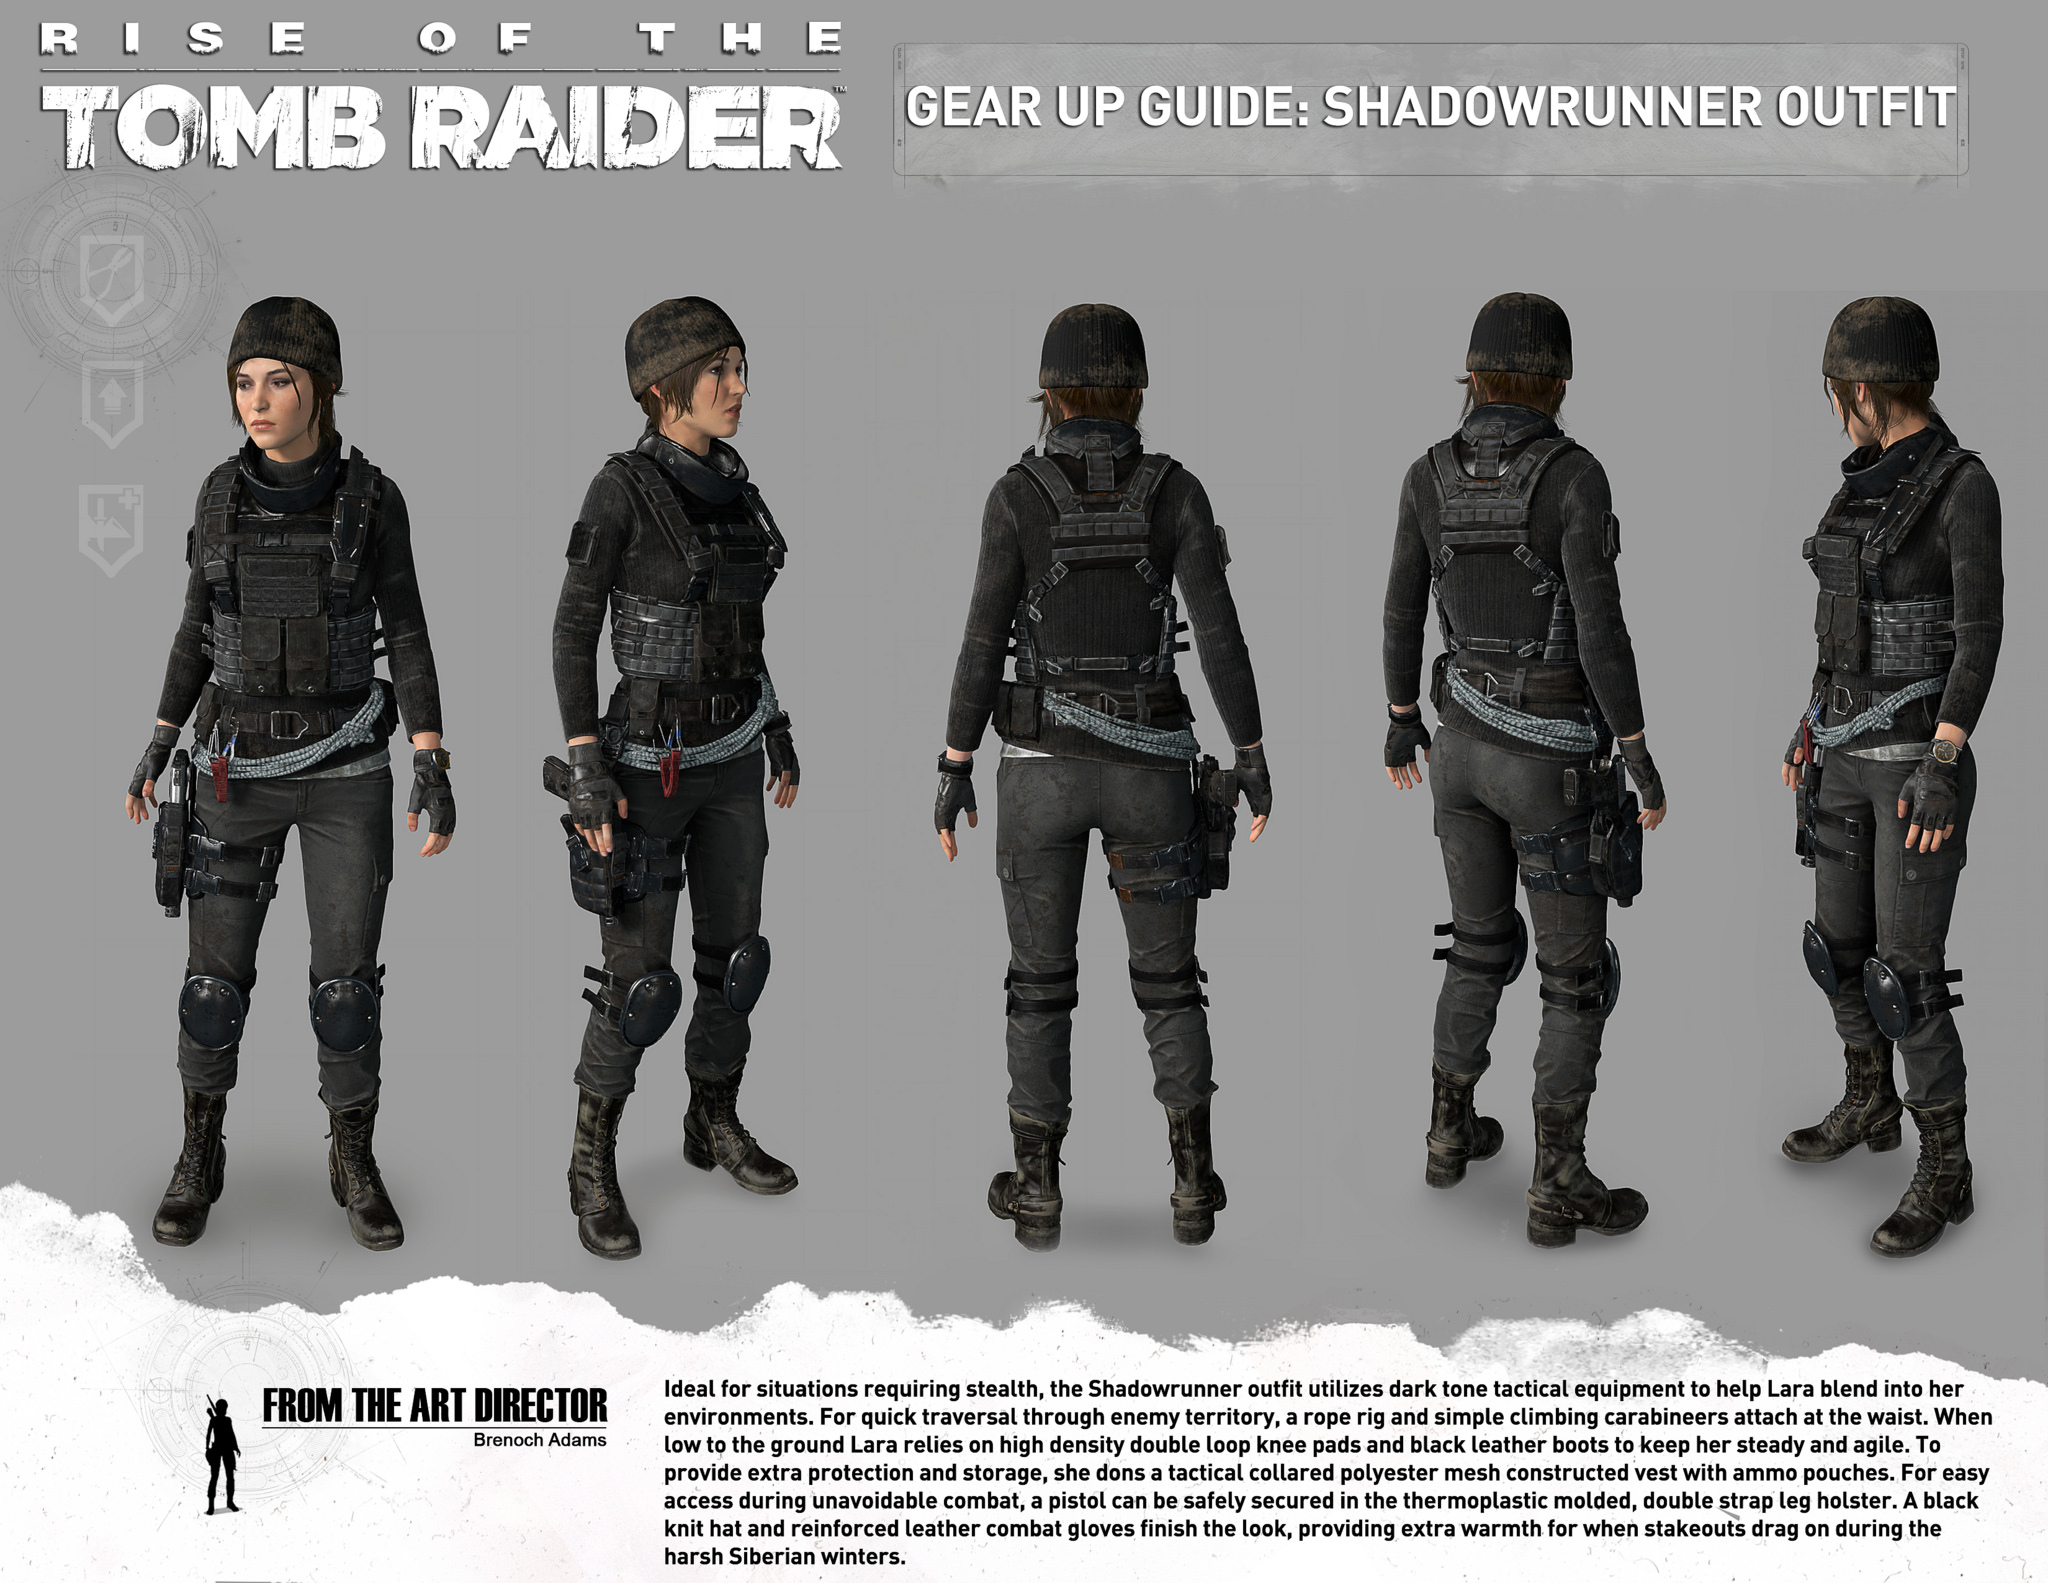 Shadowrunner Outfit